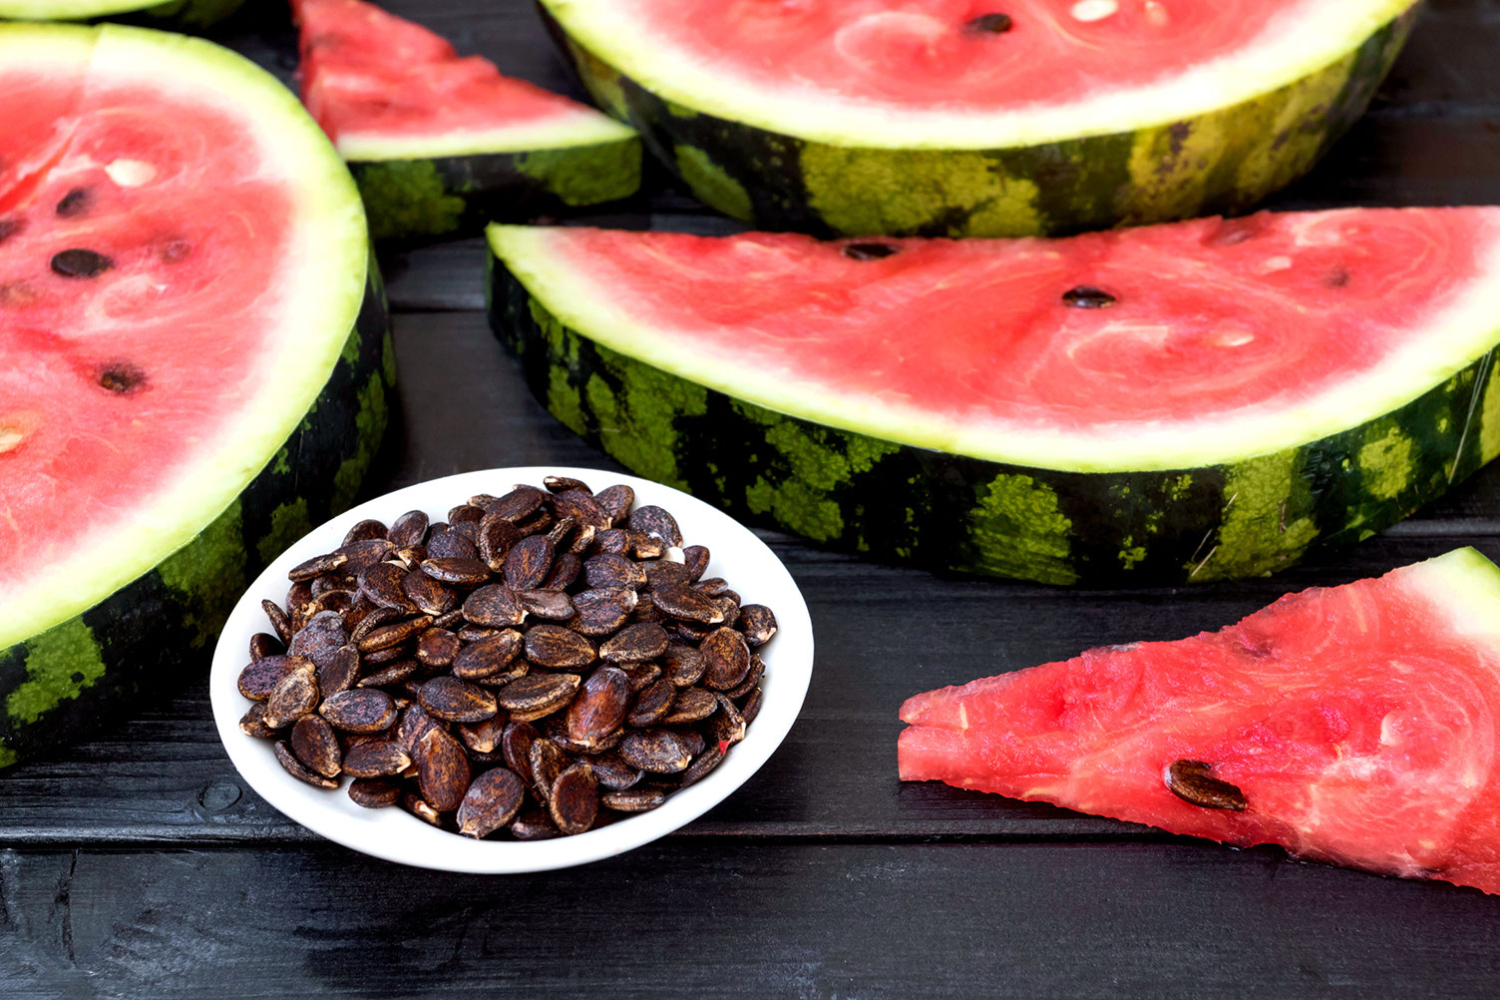 Watermelon seeds are good for you.